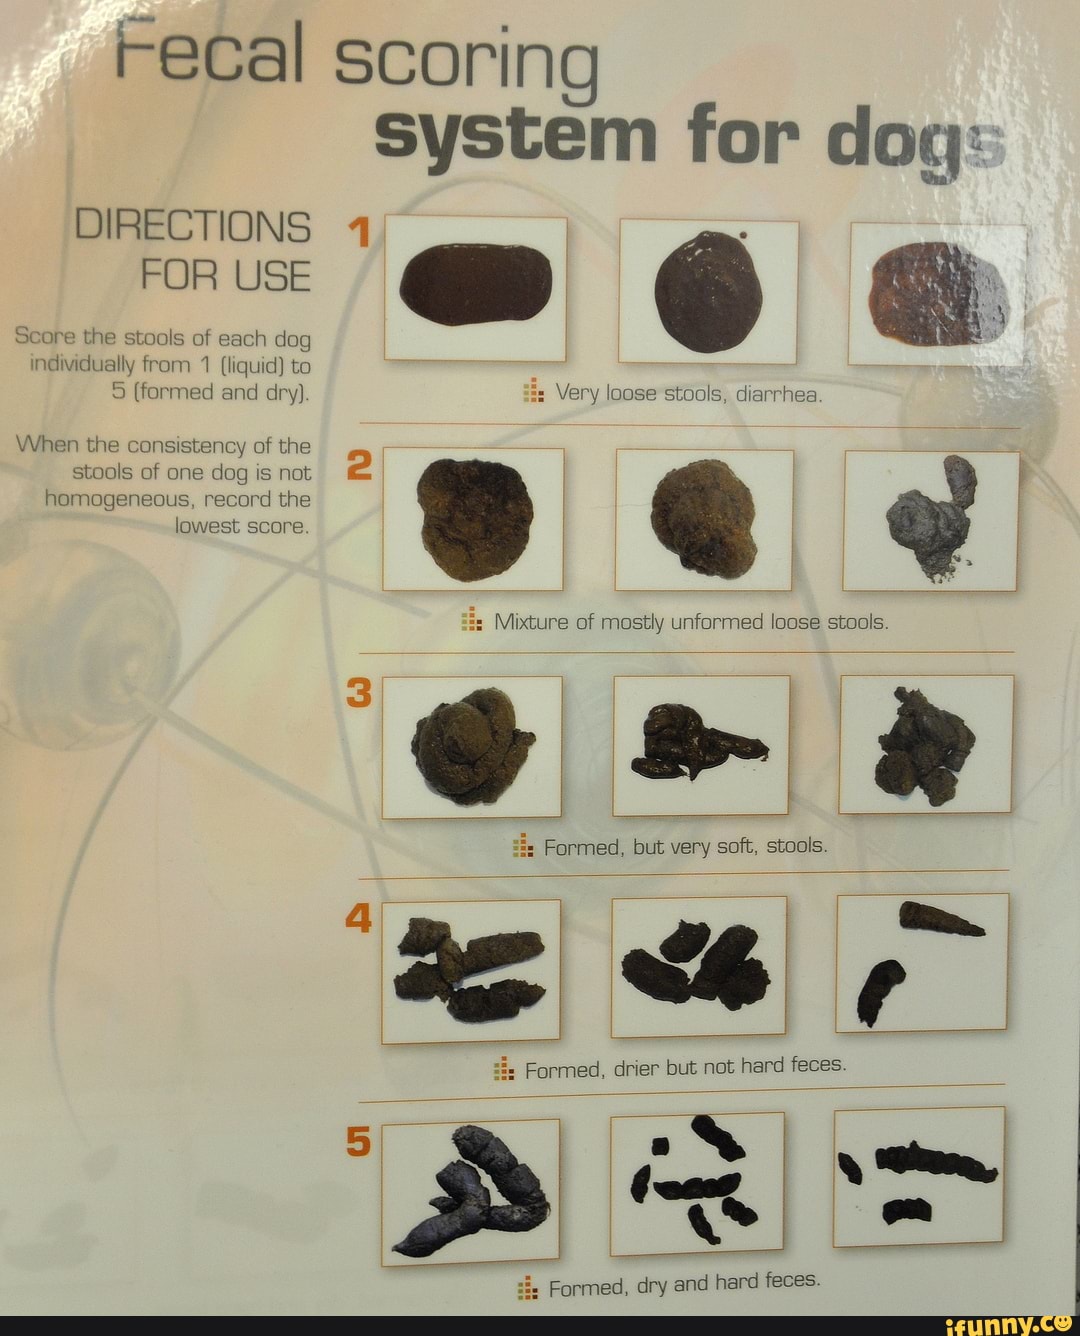 and-can-you-imagine-the-trophy-fecal-scoring-system-for-dog